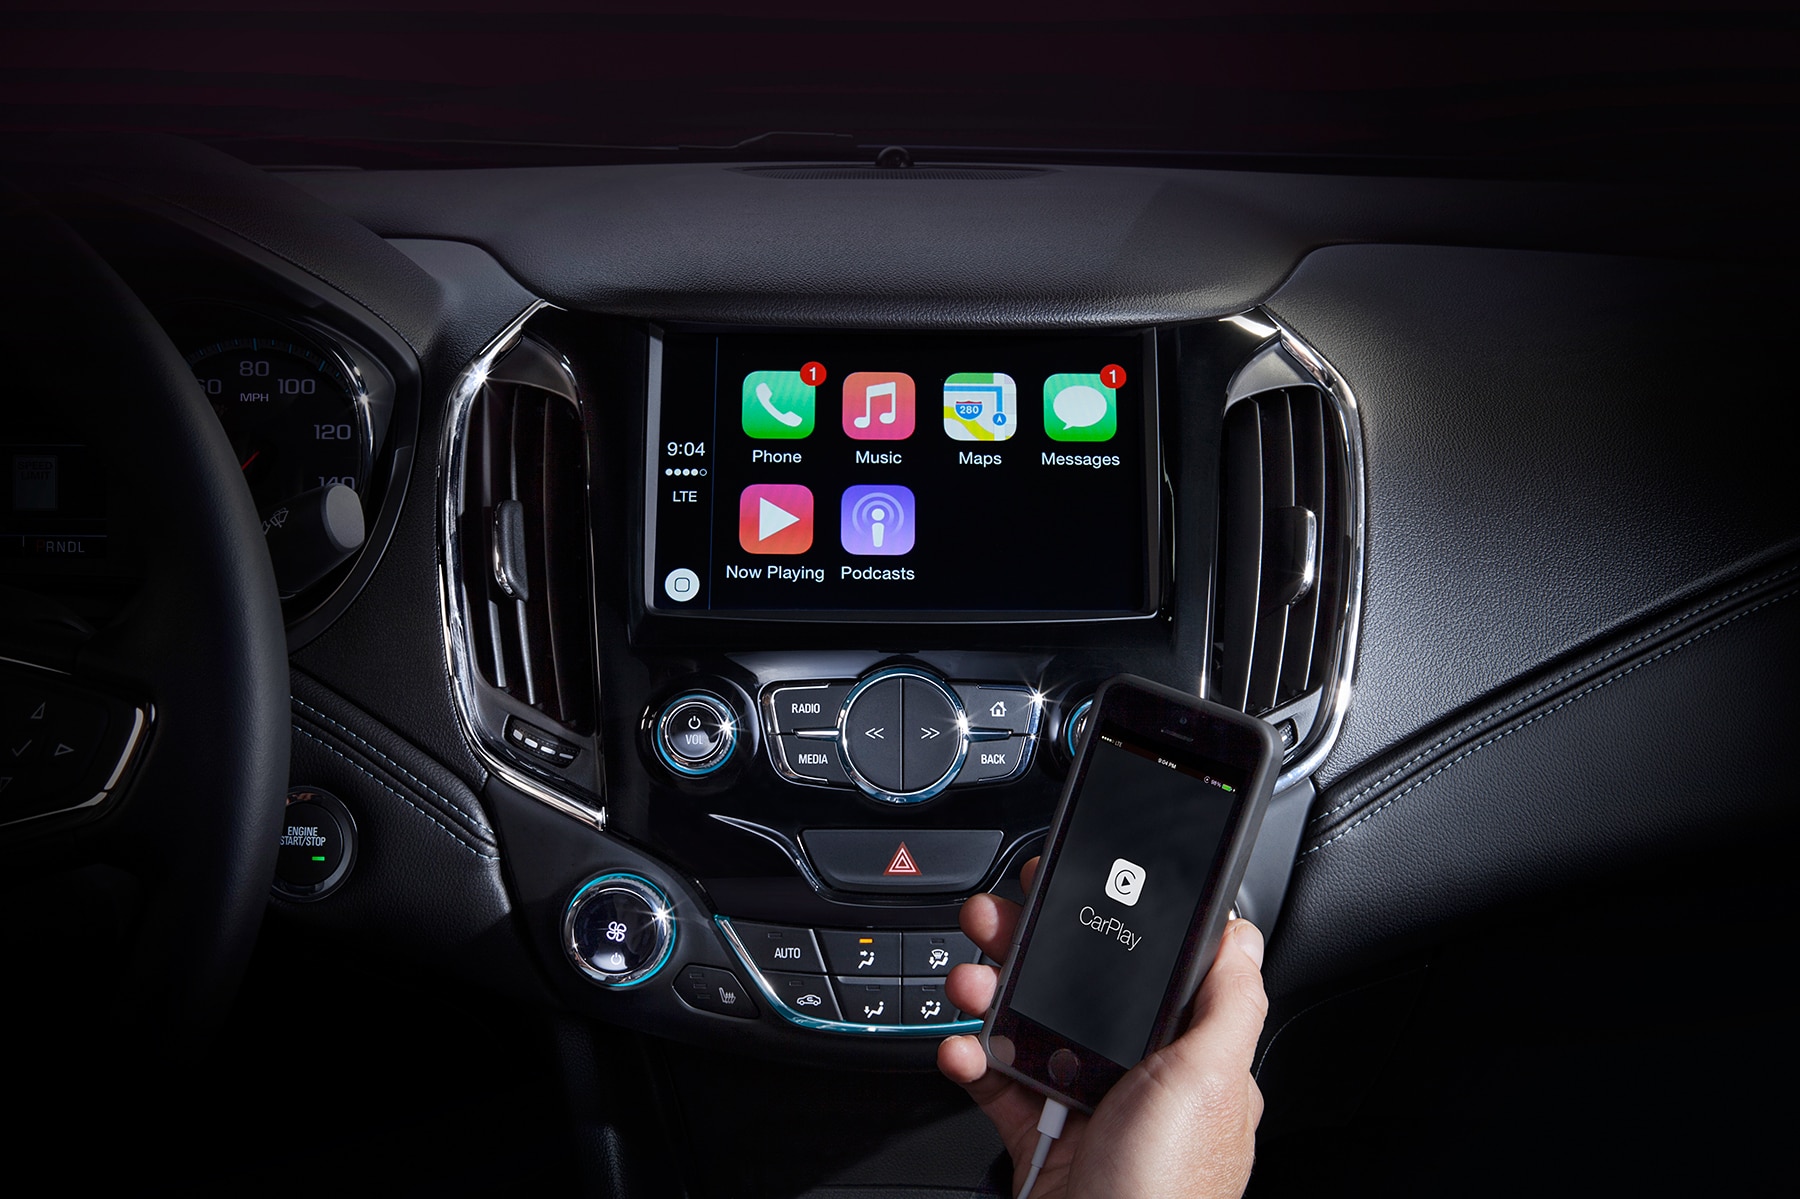 List of vehicles that are compatible with Apple CarPlay